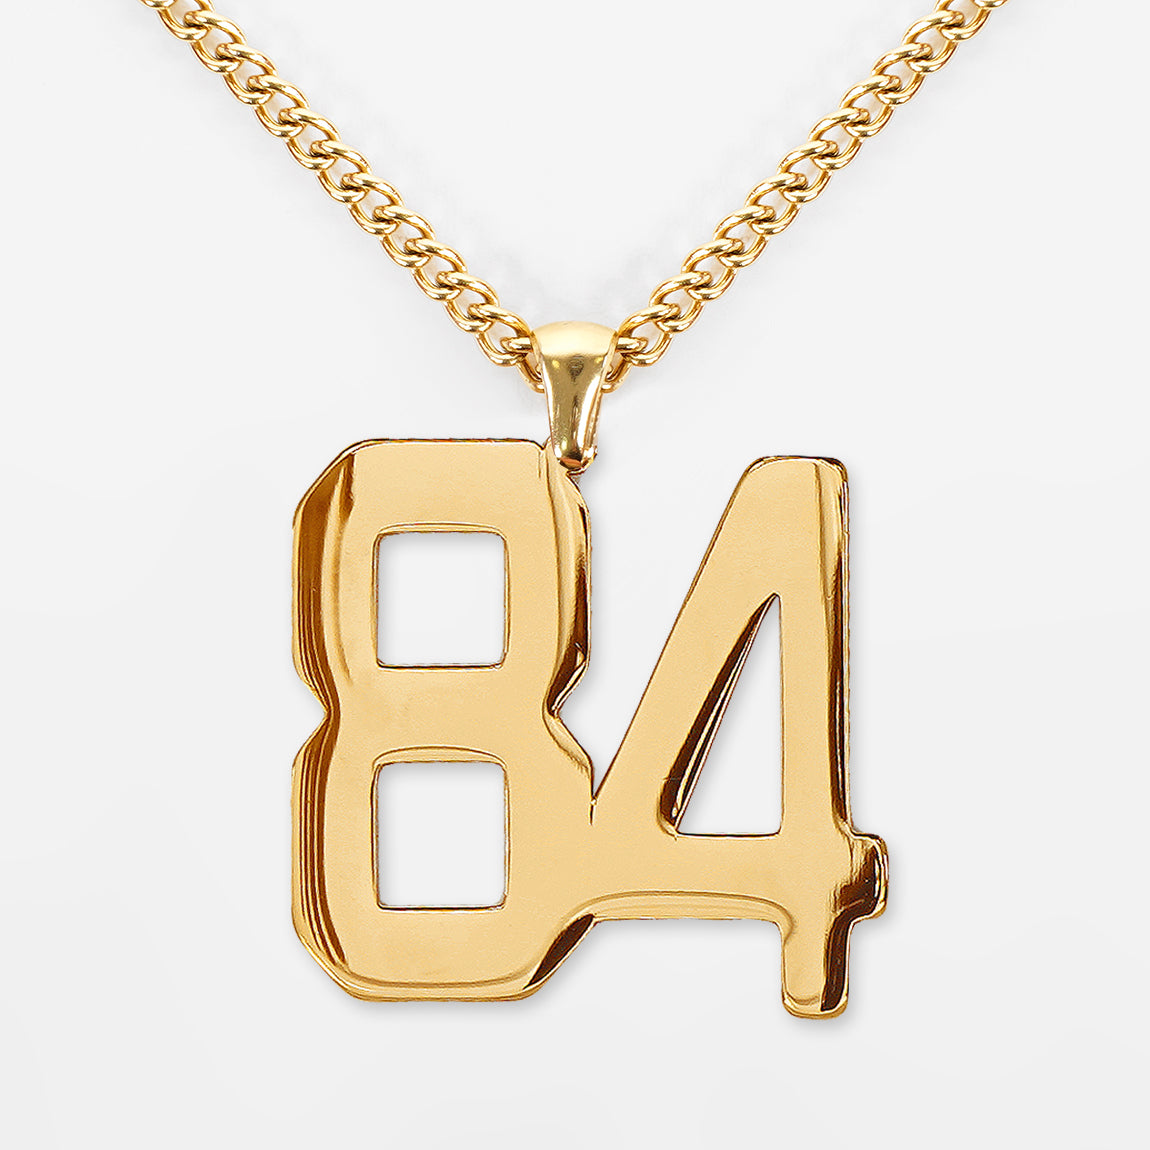 84 Number Pendant with Chain Necklace - Gold Plated Stainless Steel